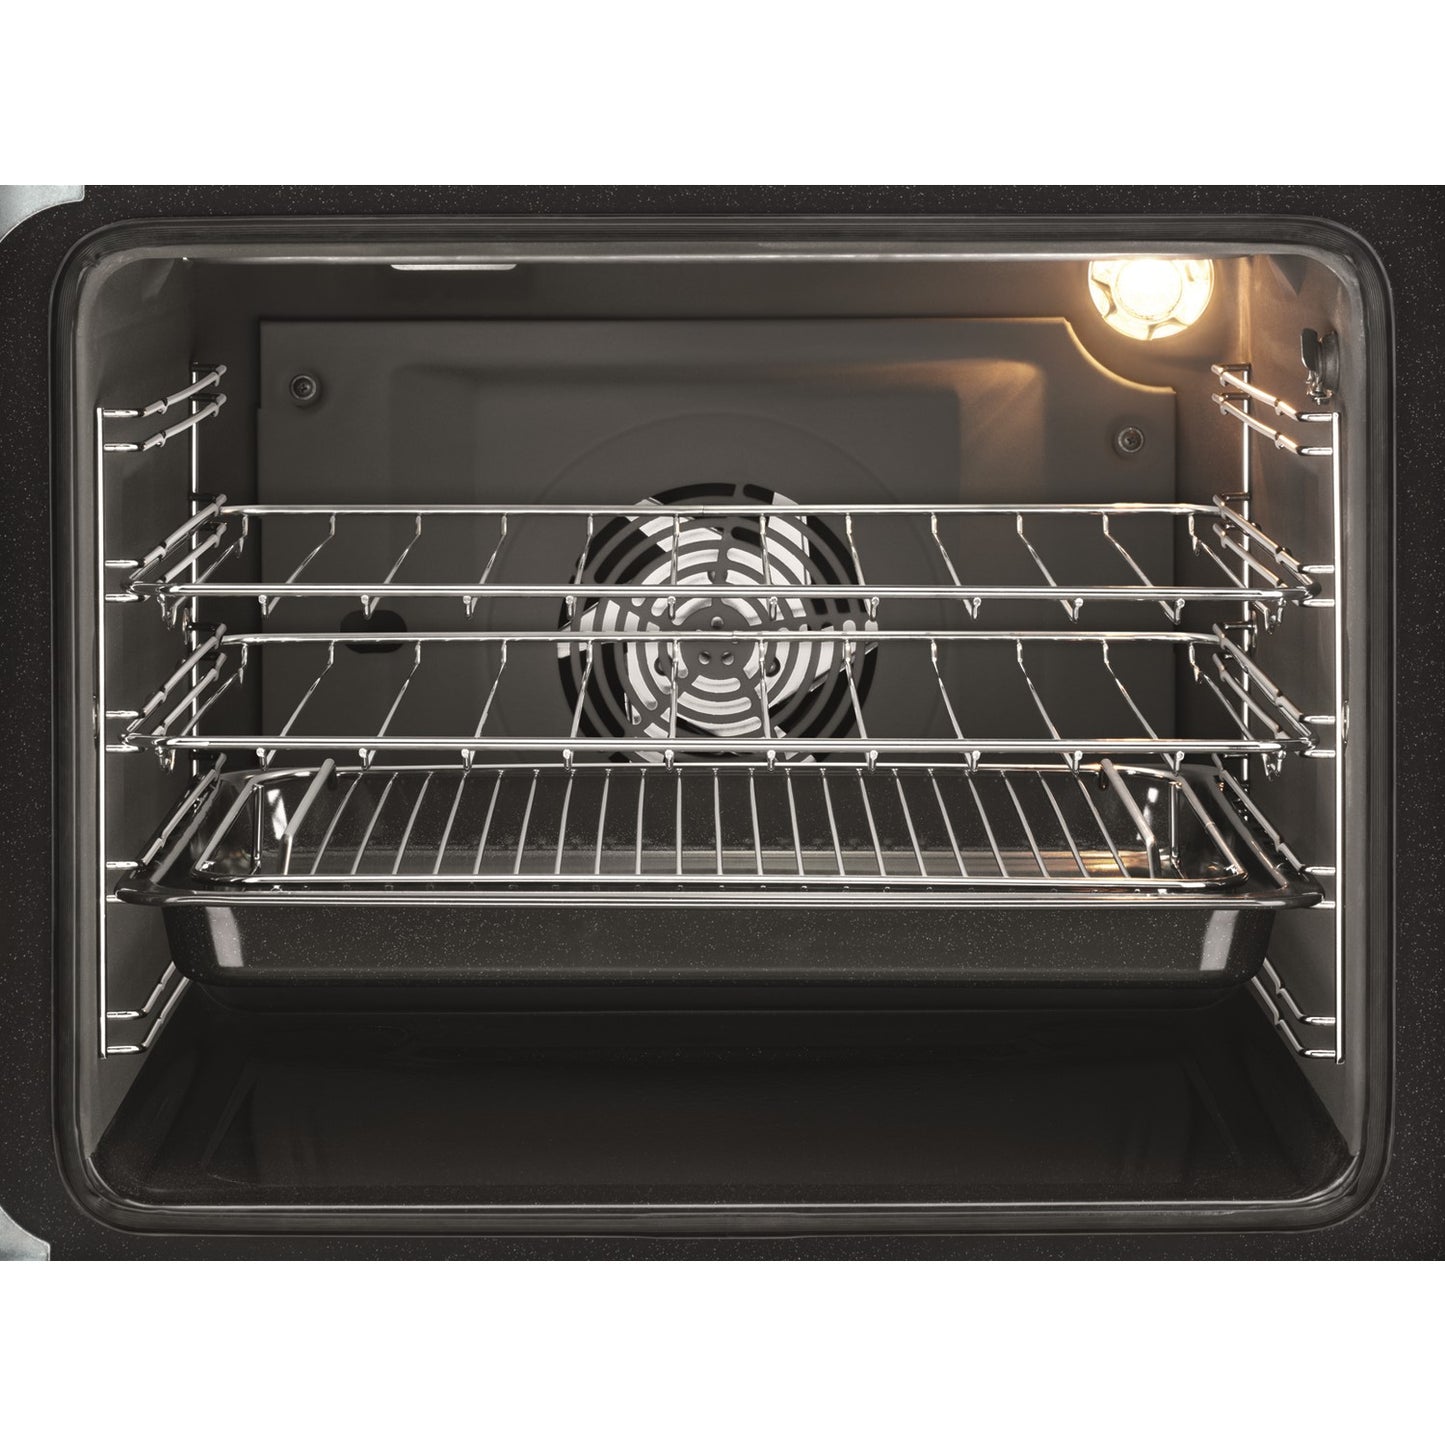 Zanussi Induction Electric Cooker With Double Oven - ZCI66250WA